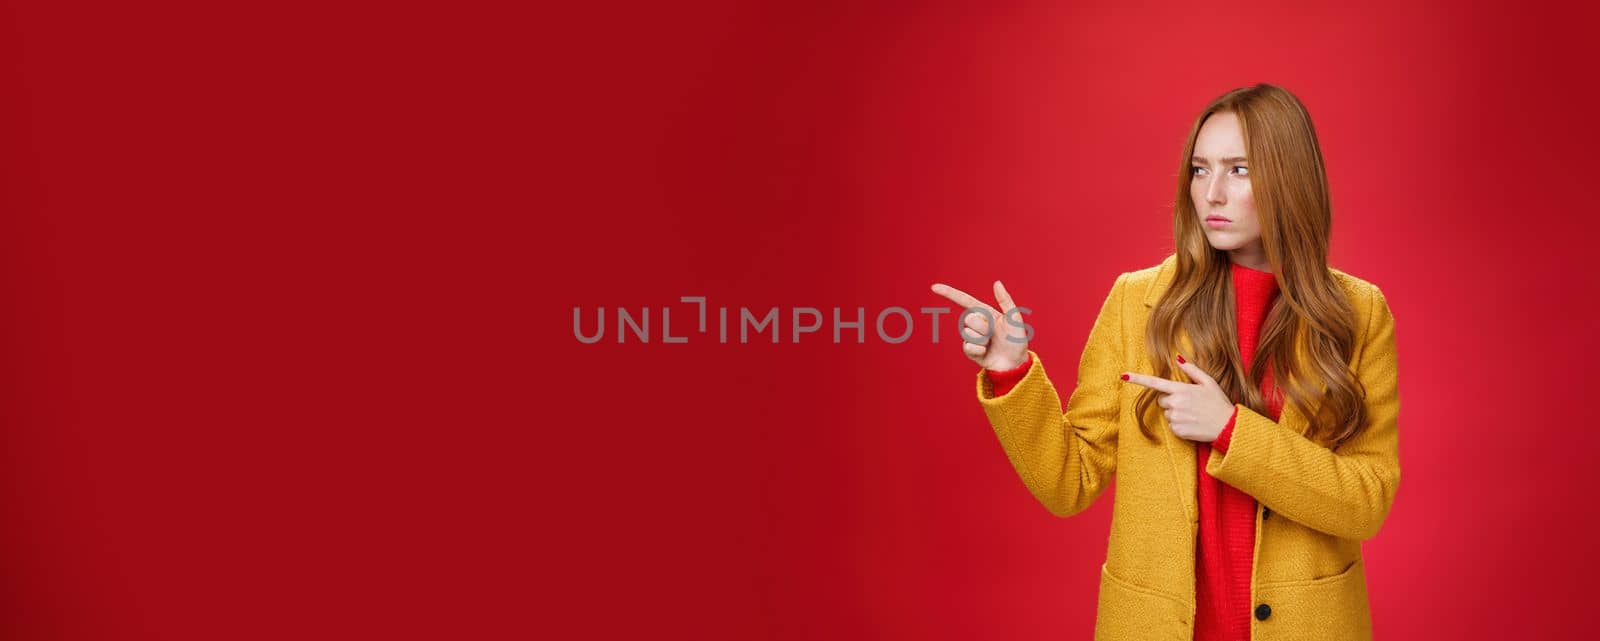 Studio shot of intense suspicious and displeased redhead female in yellow coat pointing and looking serious left squnting and frowning making focused look at something disturbing and doubtful. Emotions and facial expressions concept